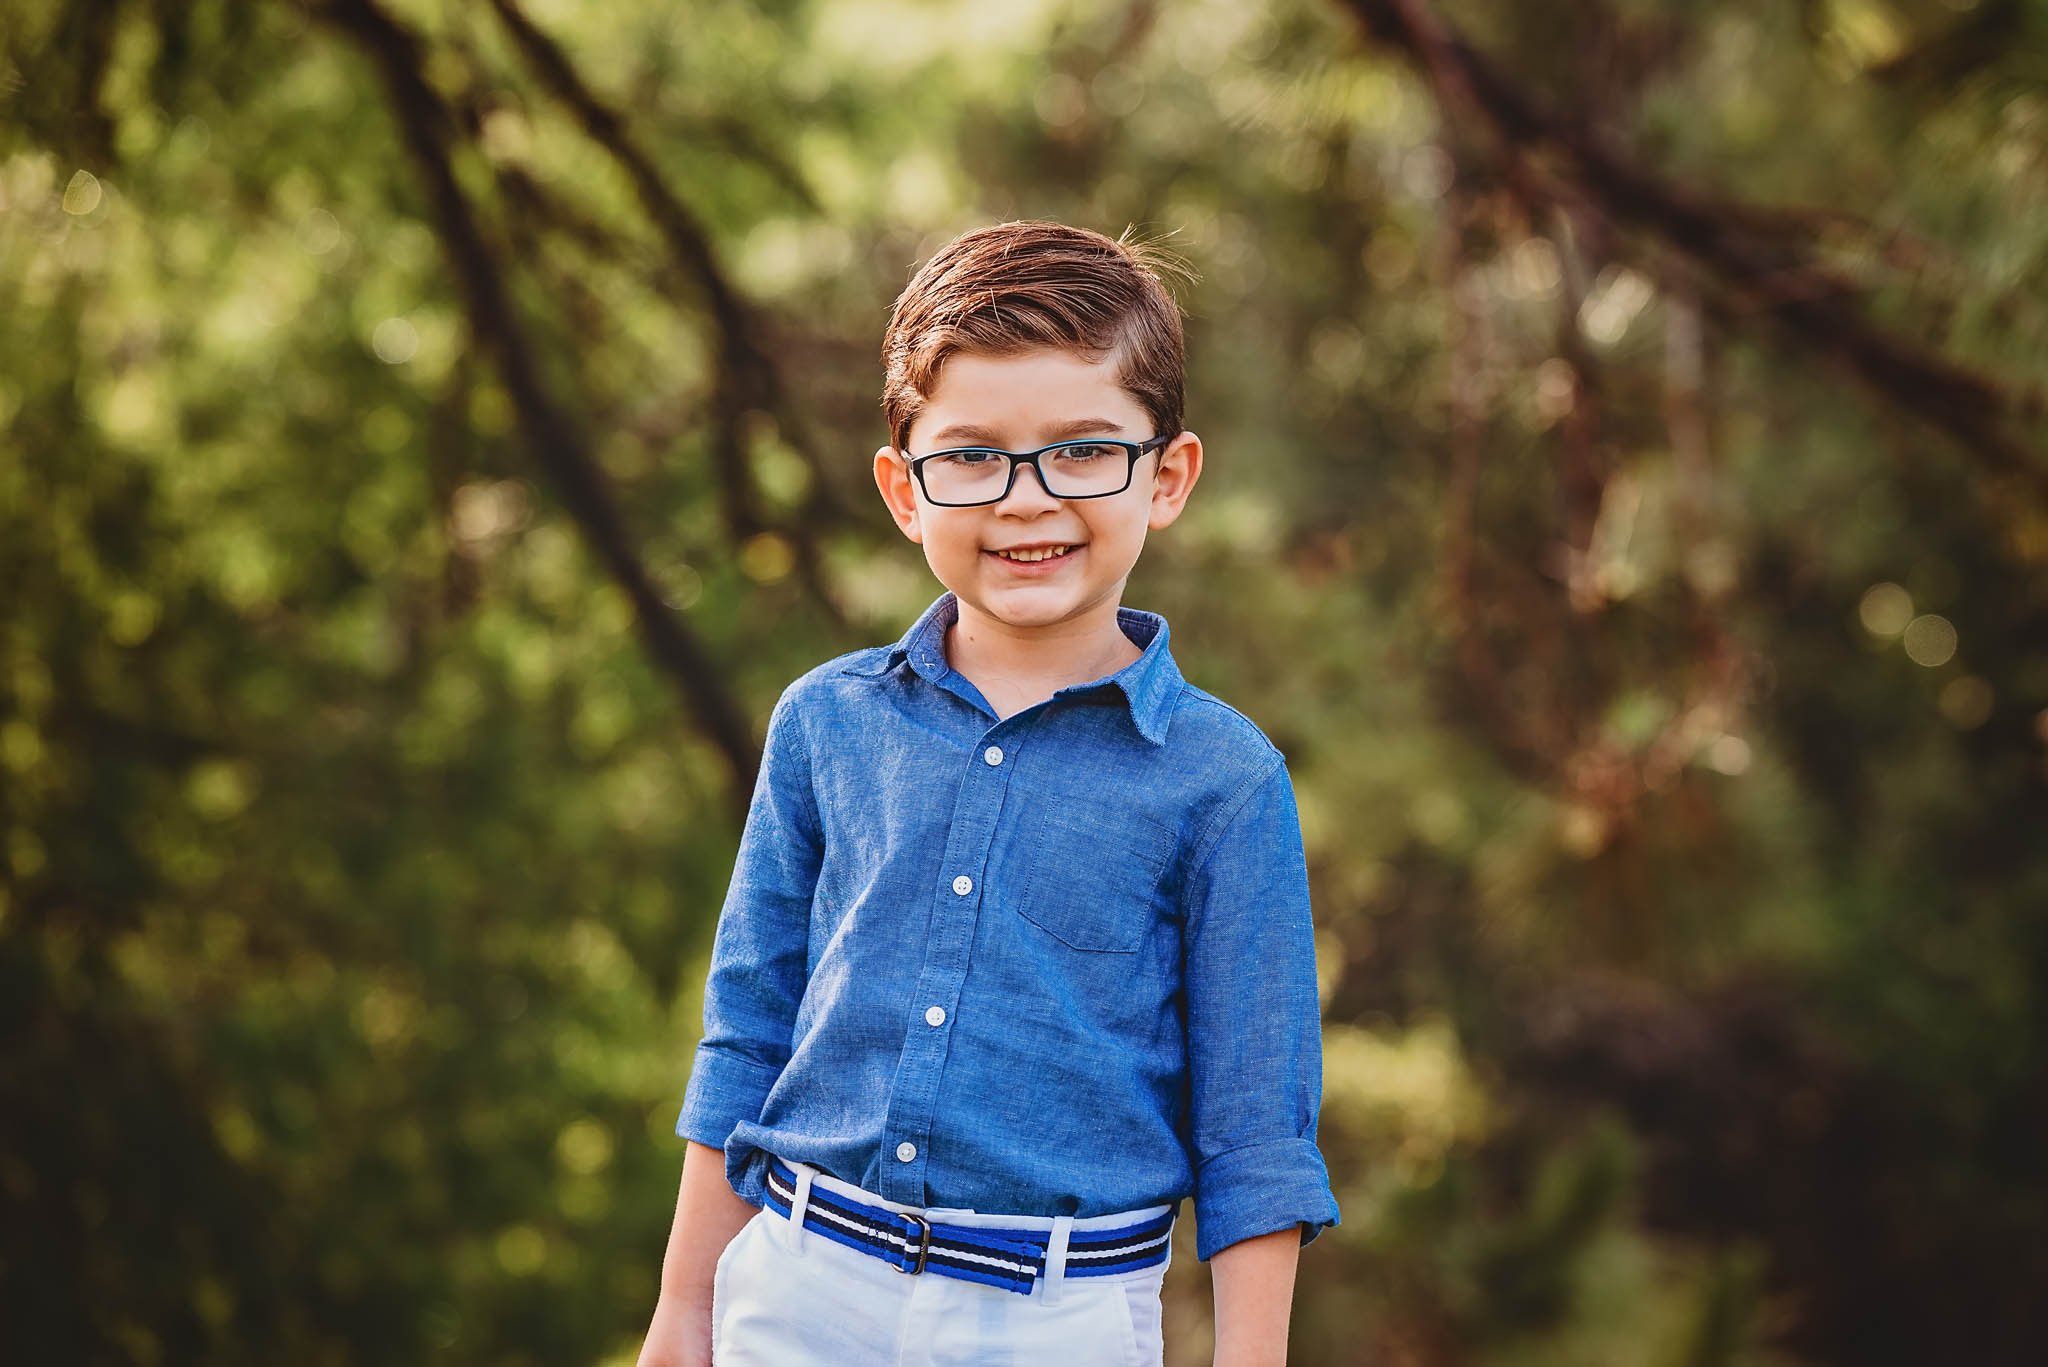 A little boy wearing blue glasses and a blue shirt smiles sweetly into the camera